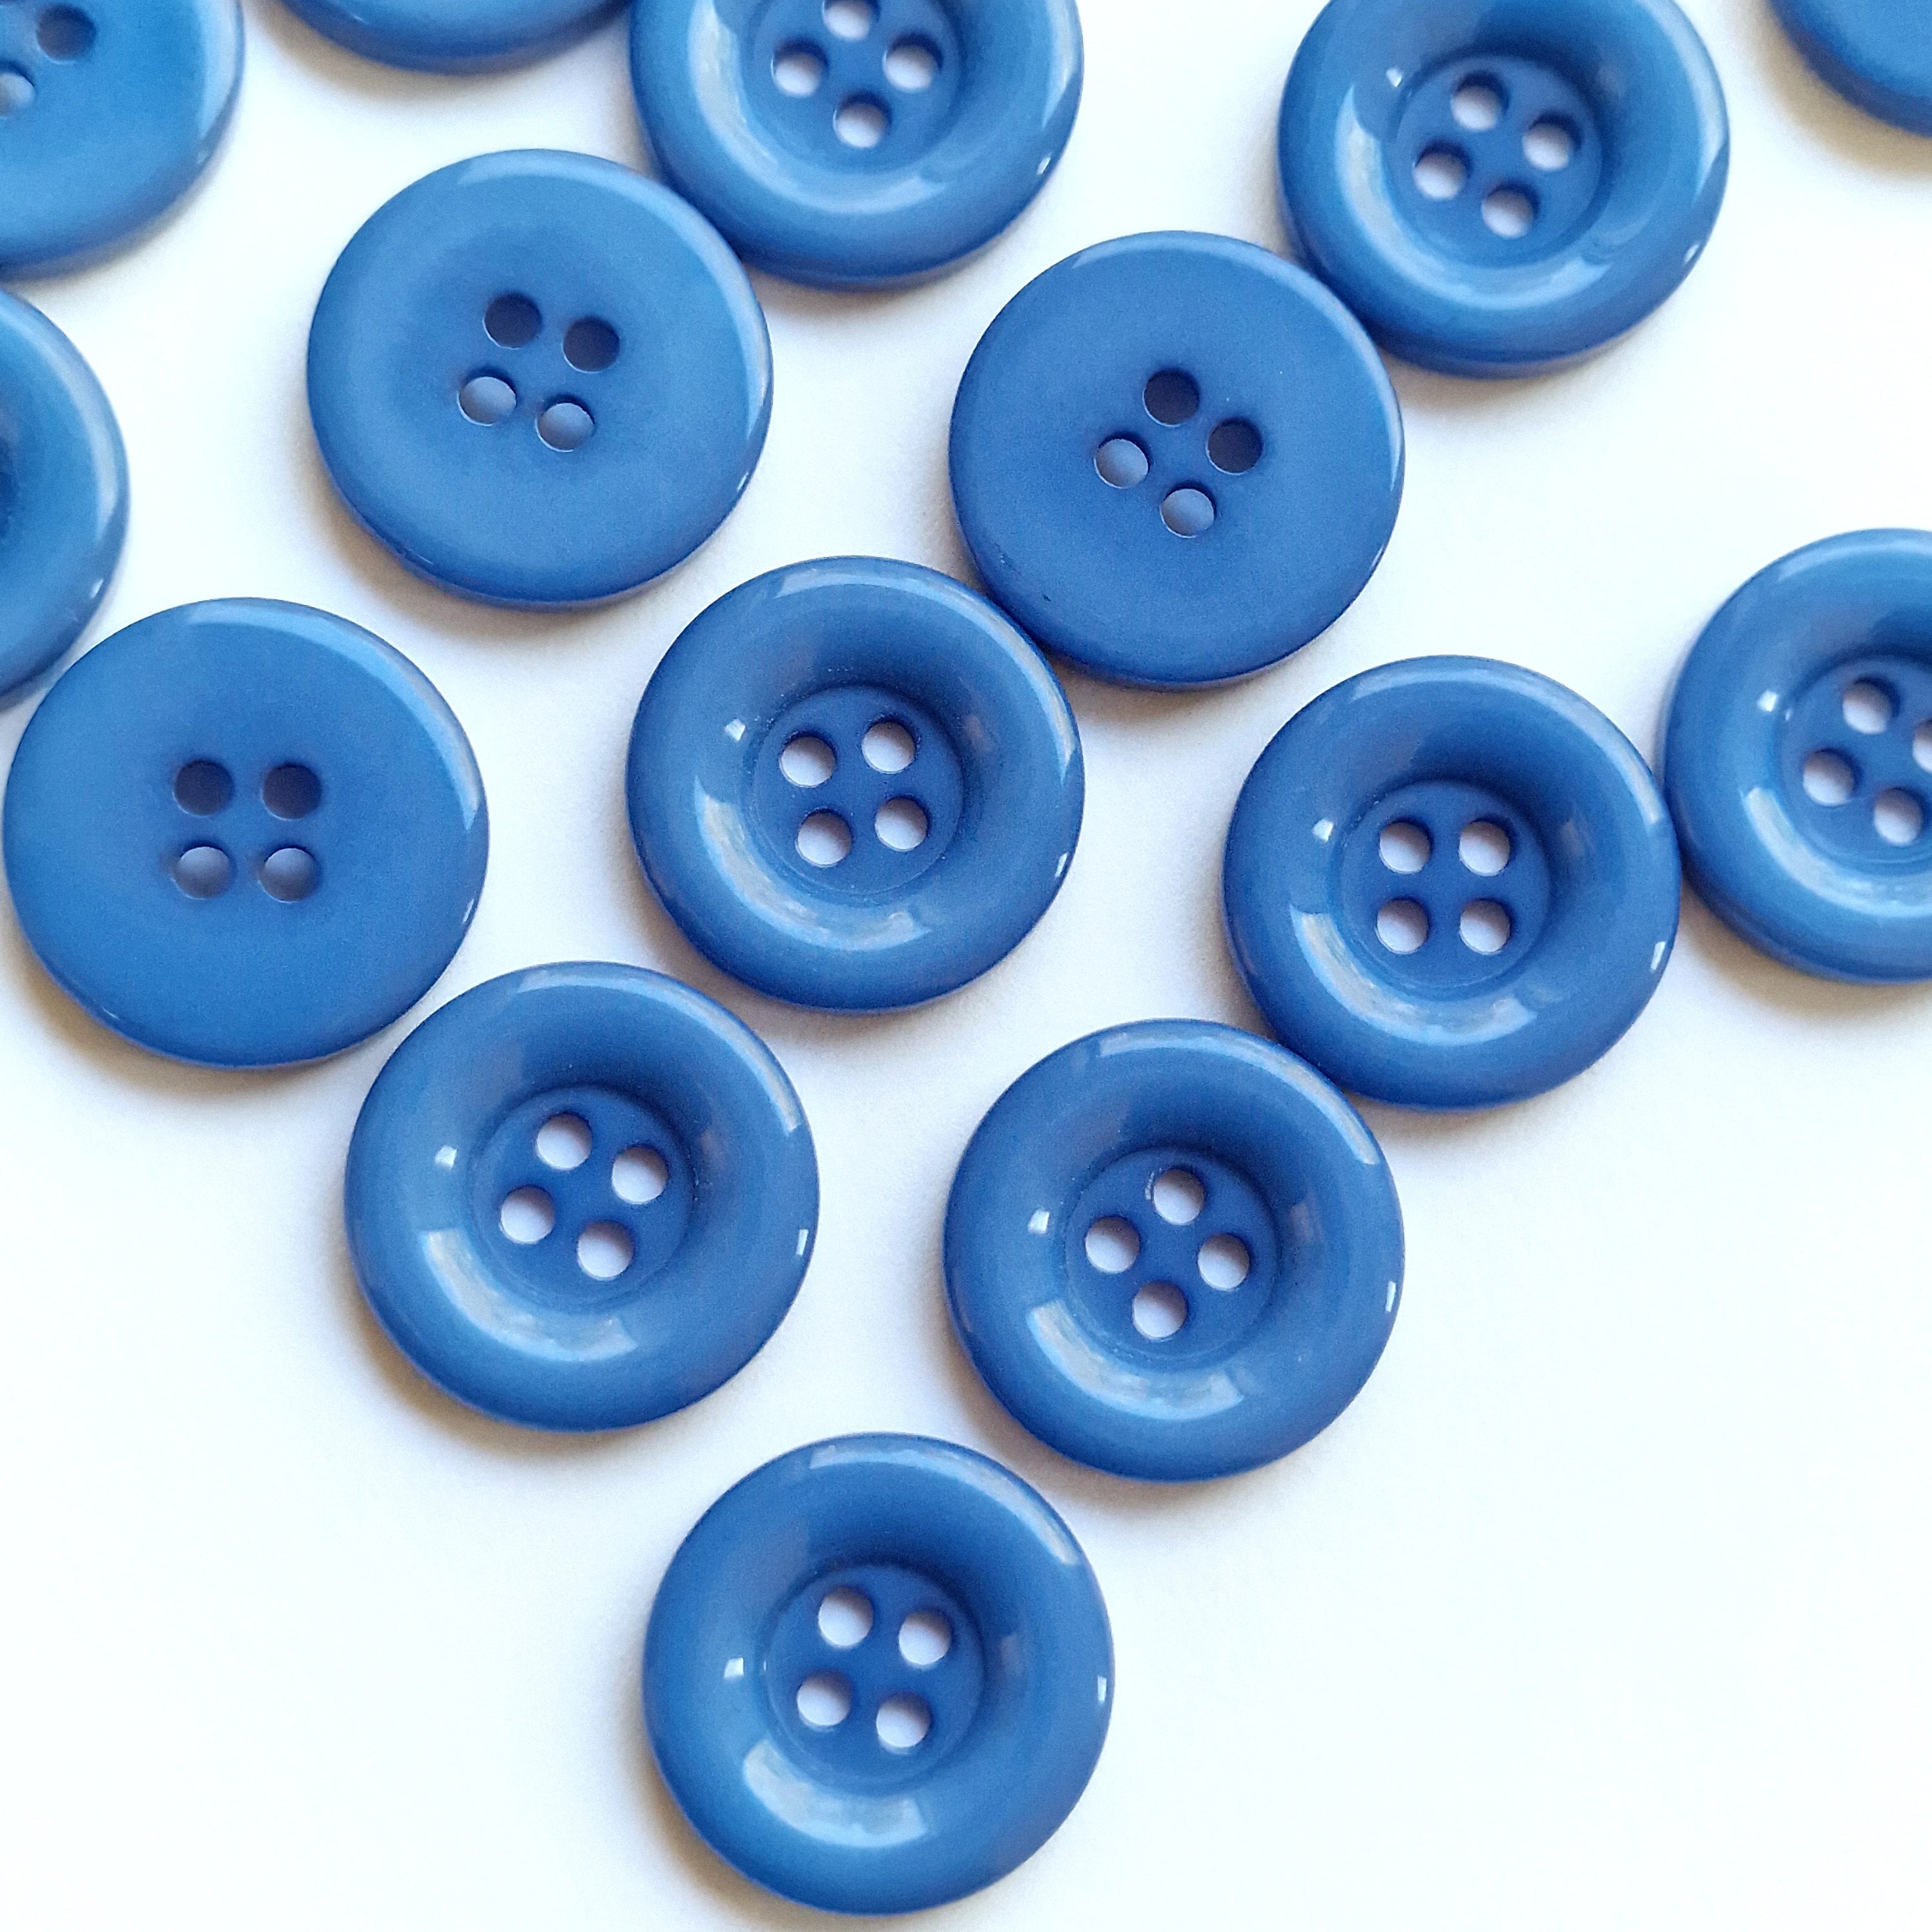 MajorCrafts 48pcs 15mm Light Blue 4 Holes Thick Edge Round Resin Sewing Buttons